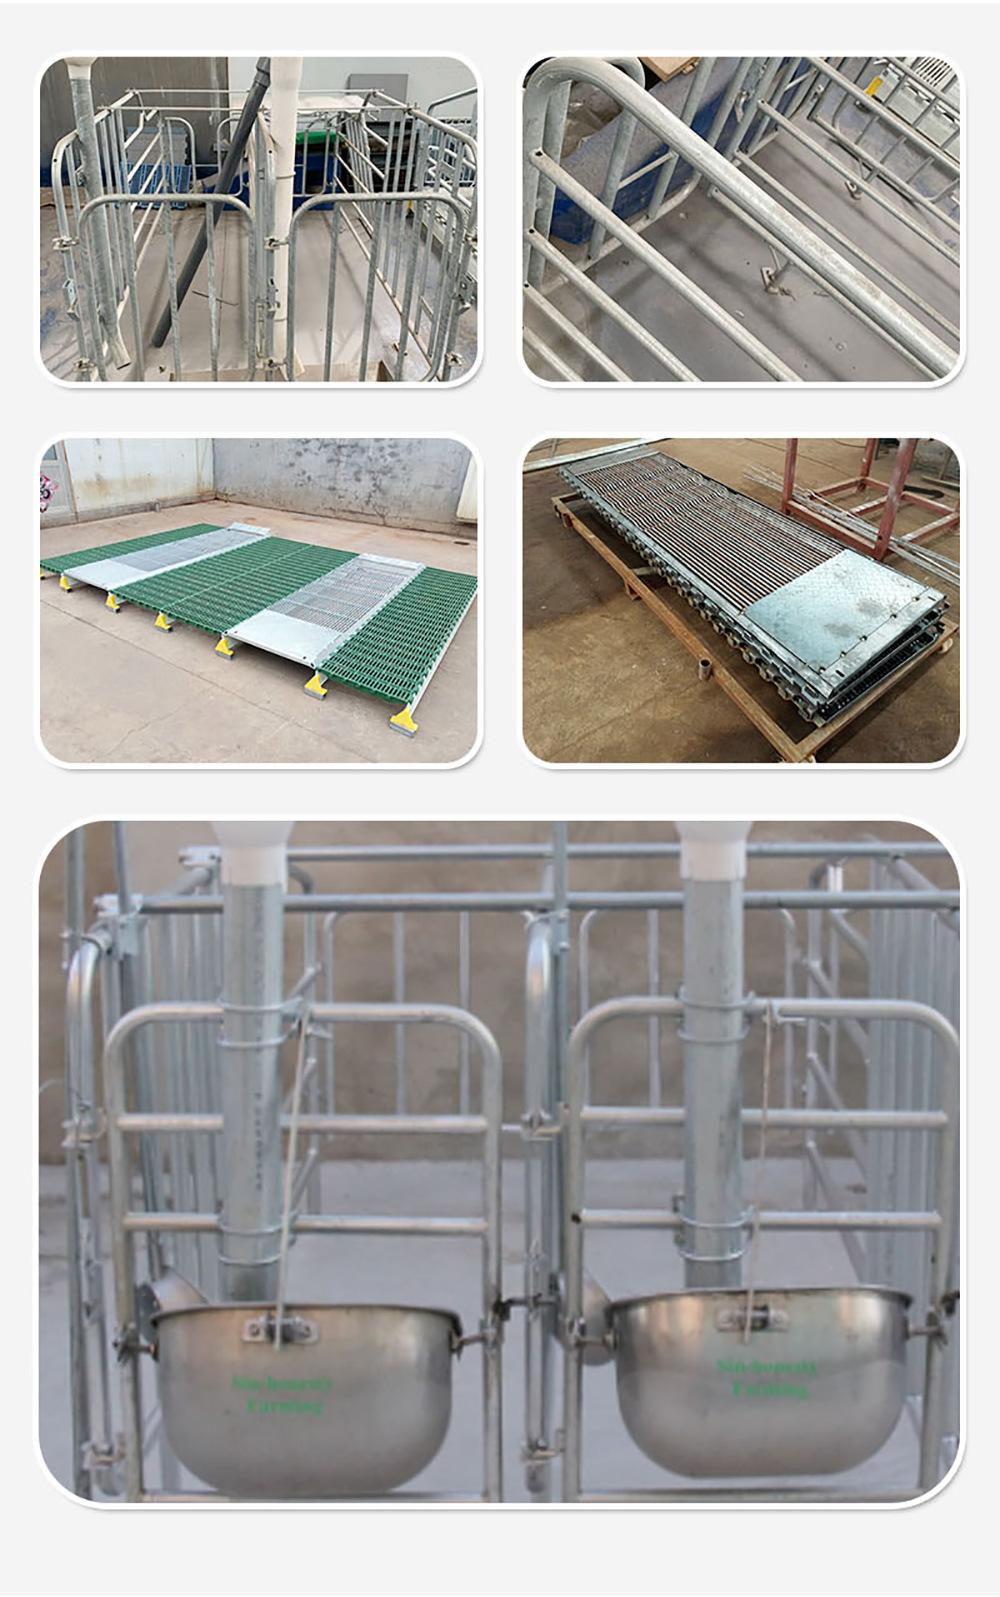 Hot Dipped Galvanized Pig Pen/Crate/Stall for Sale